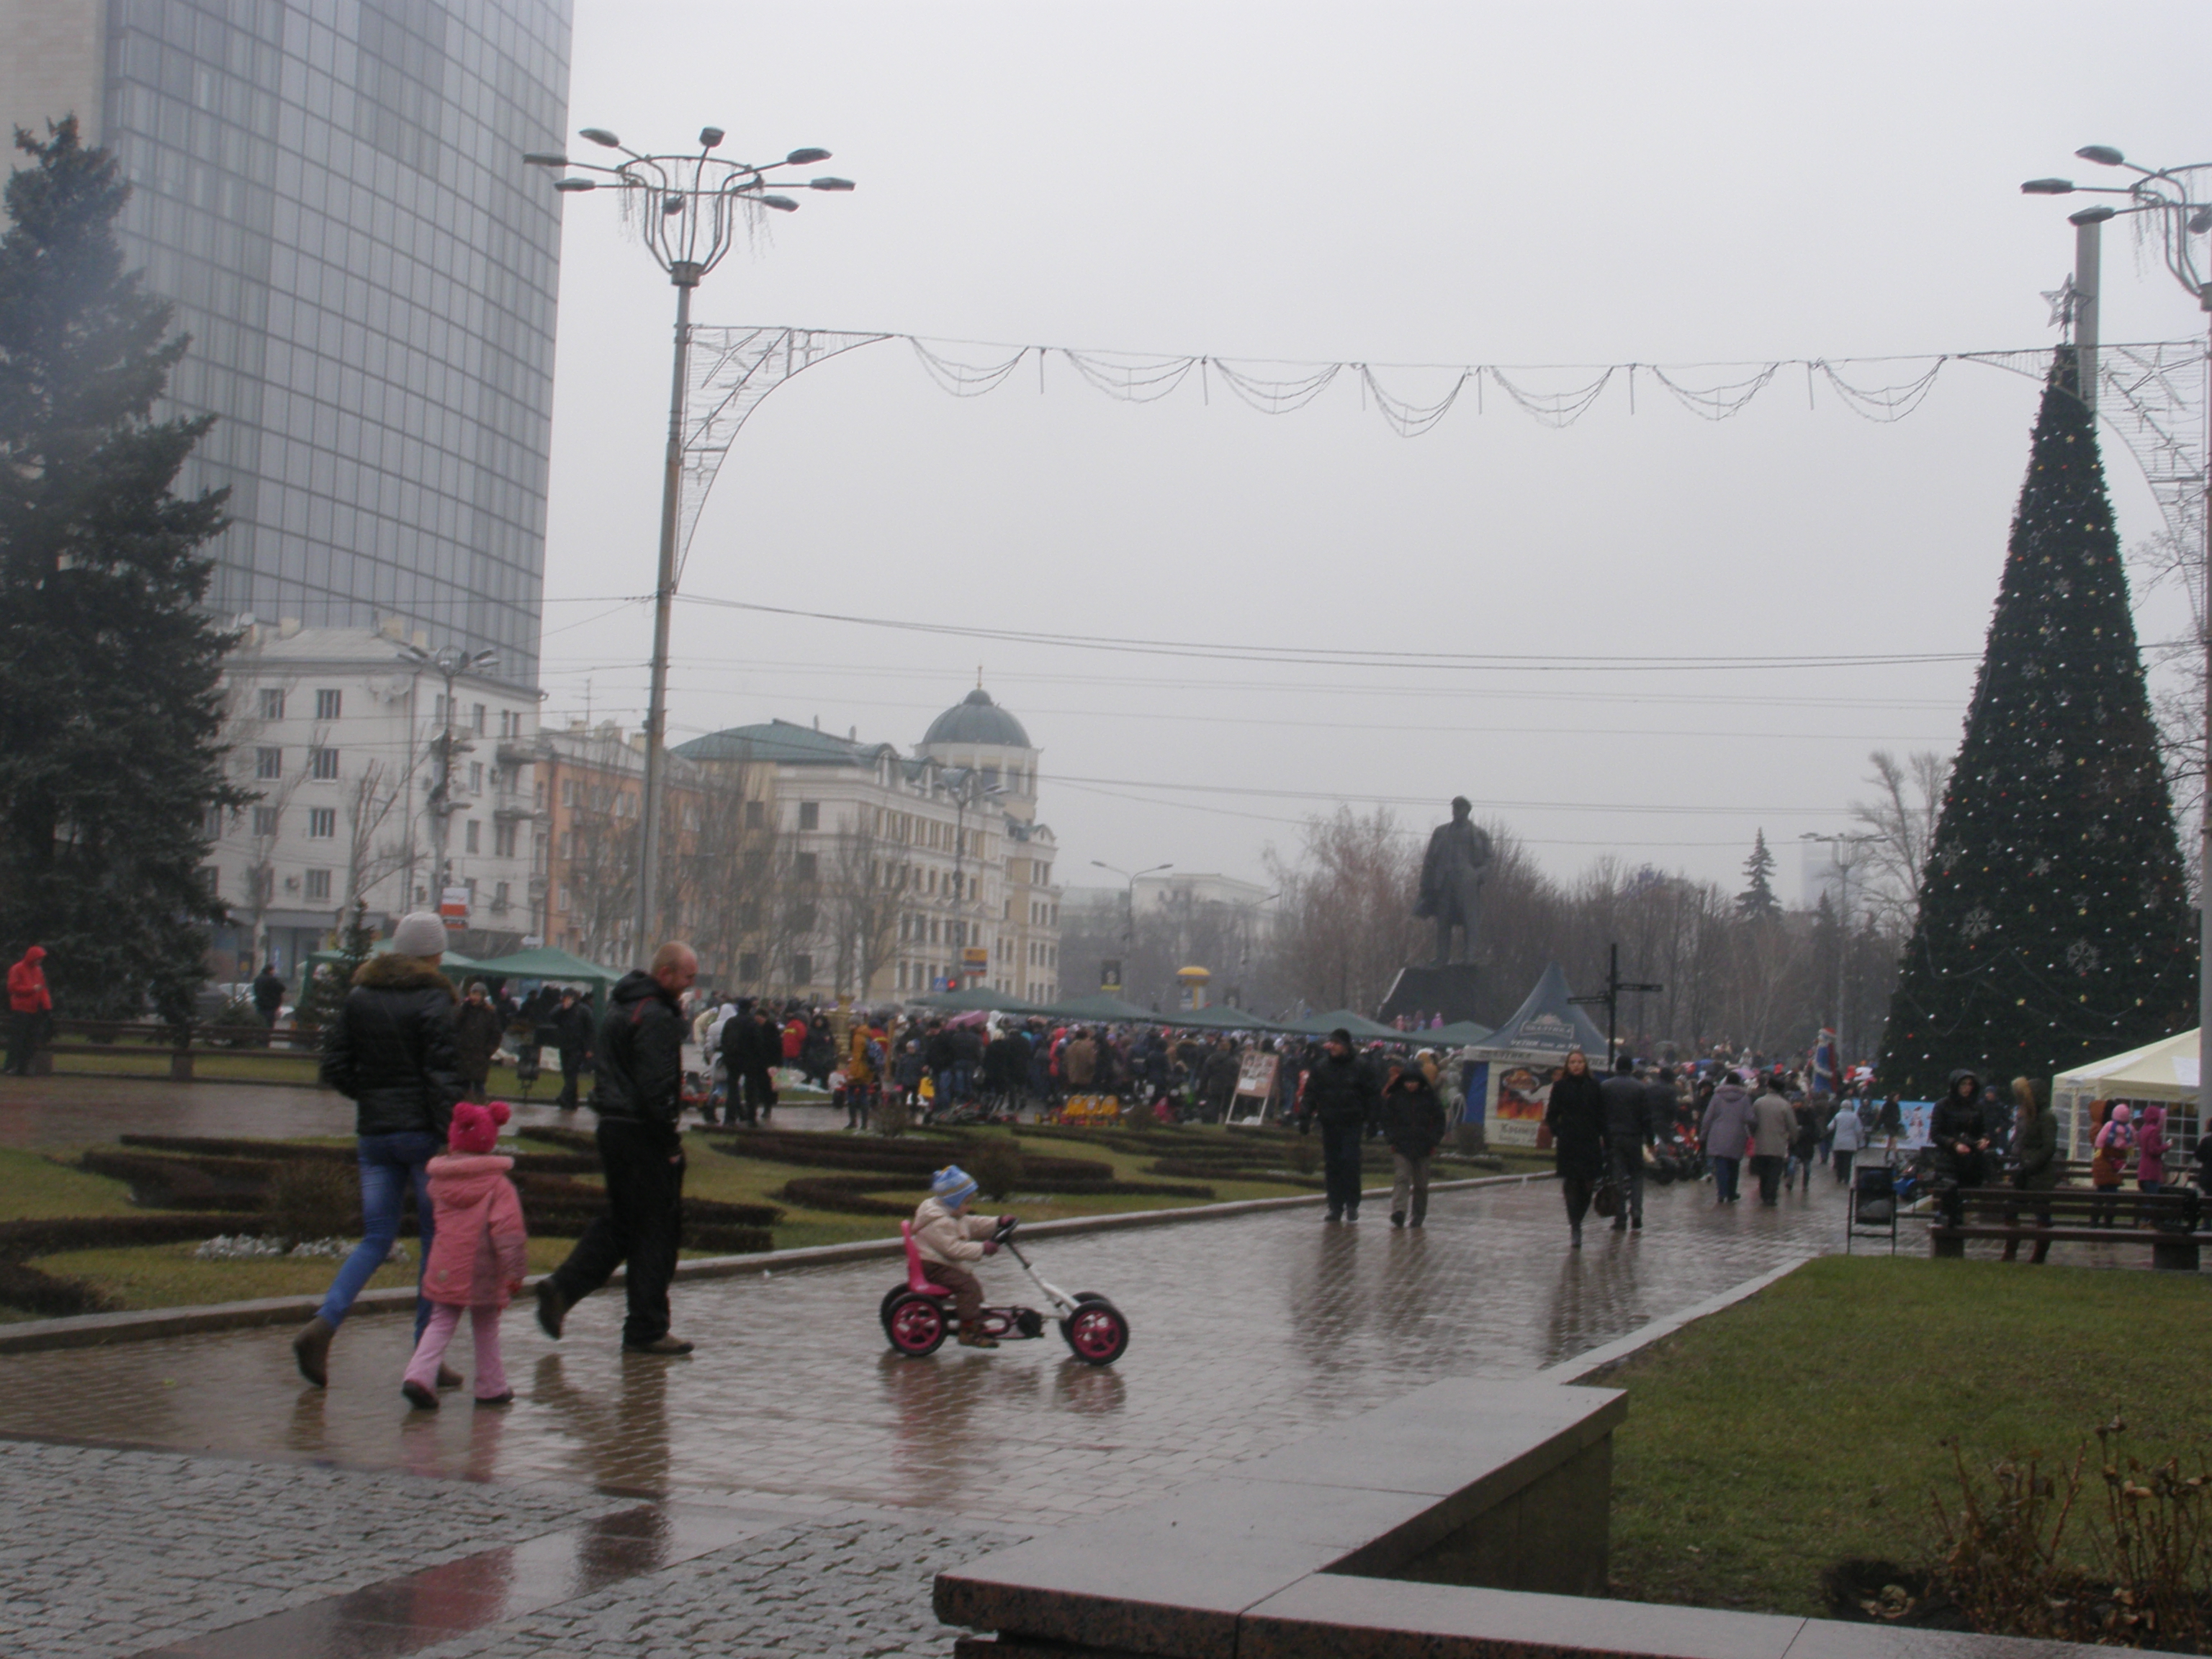 Opening of New Year Tree in Donetsk (video)